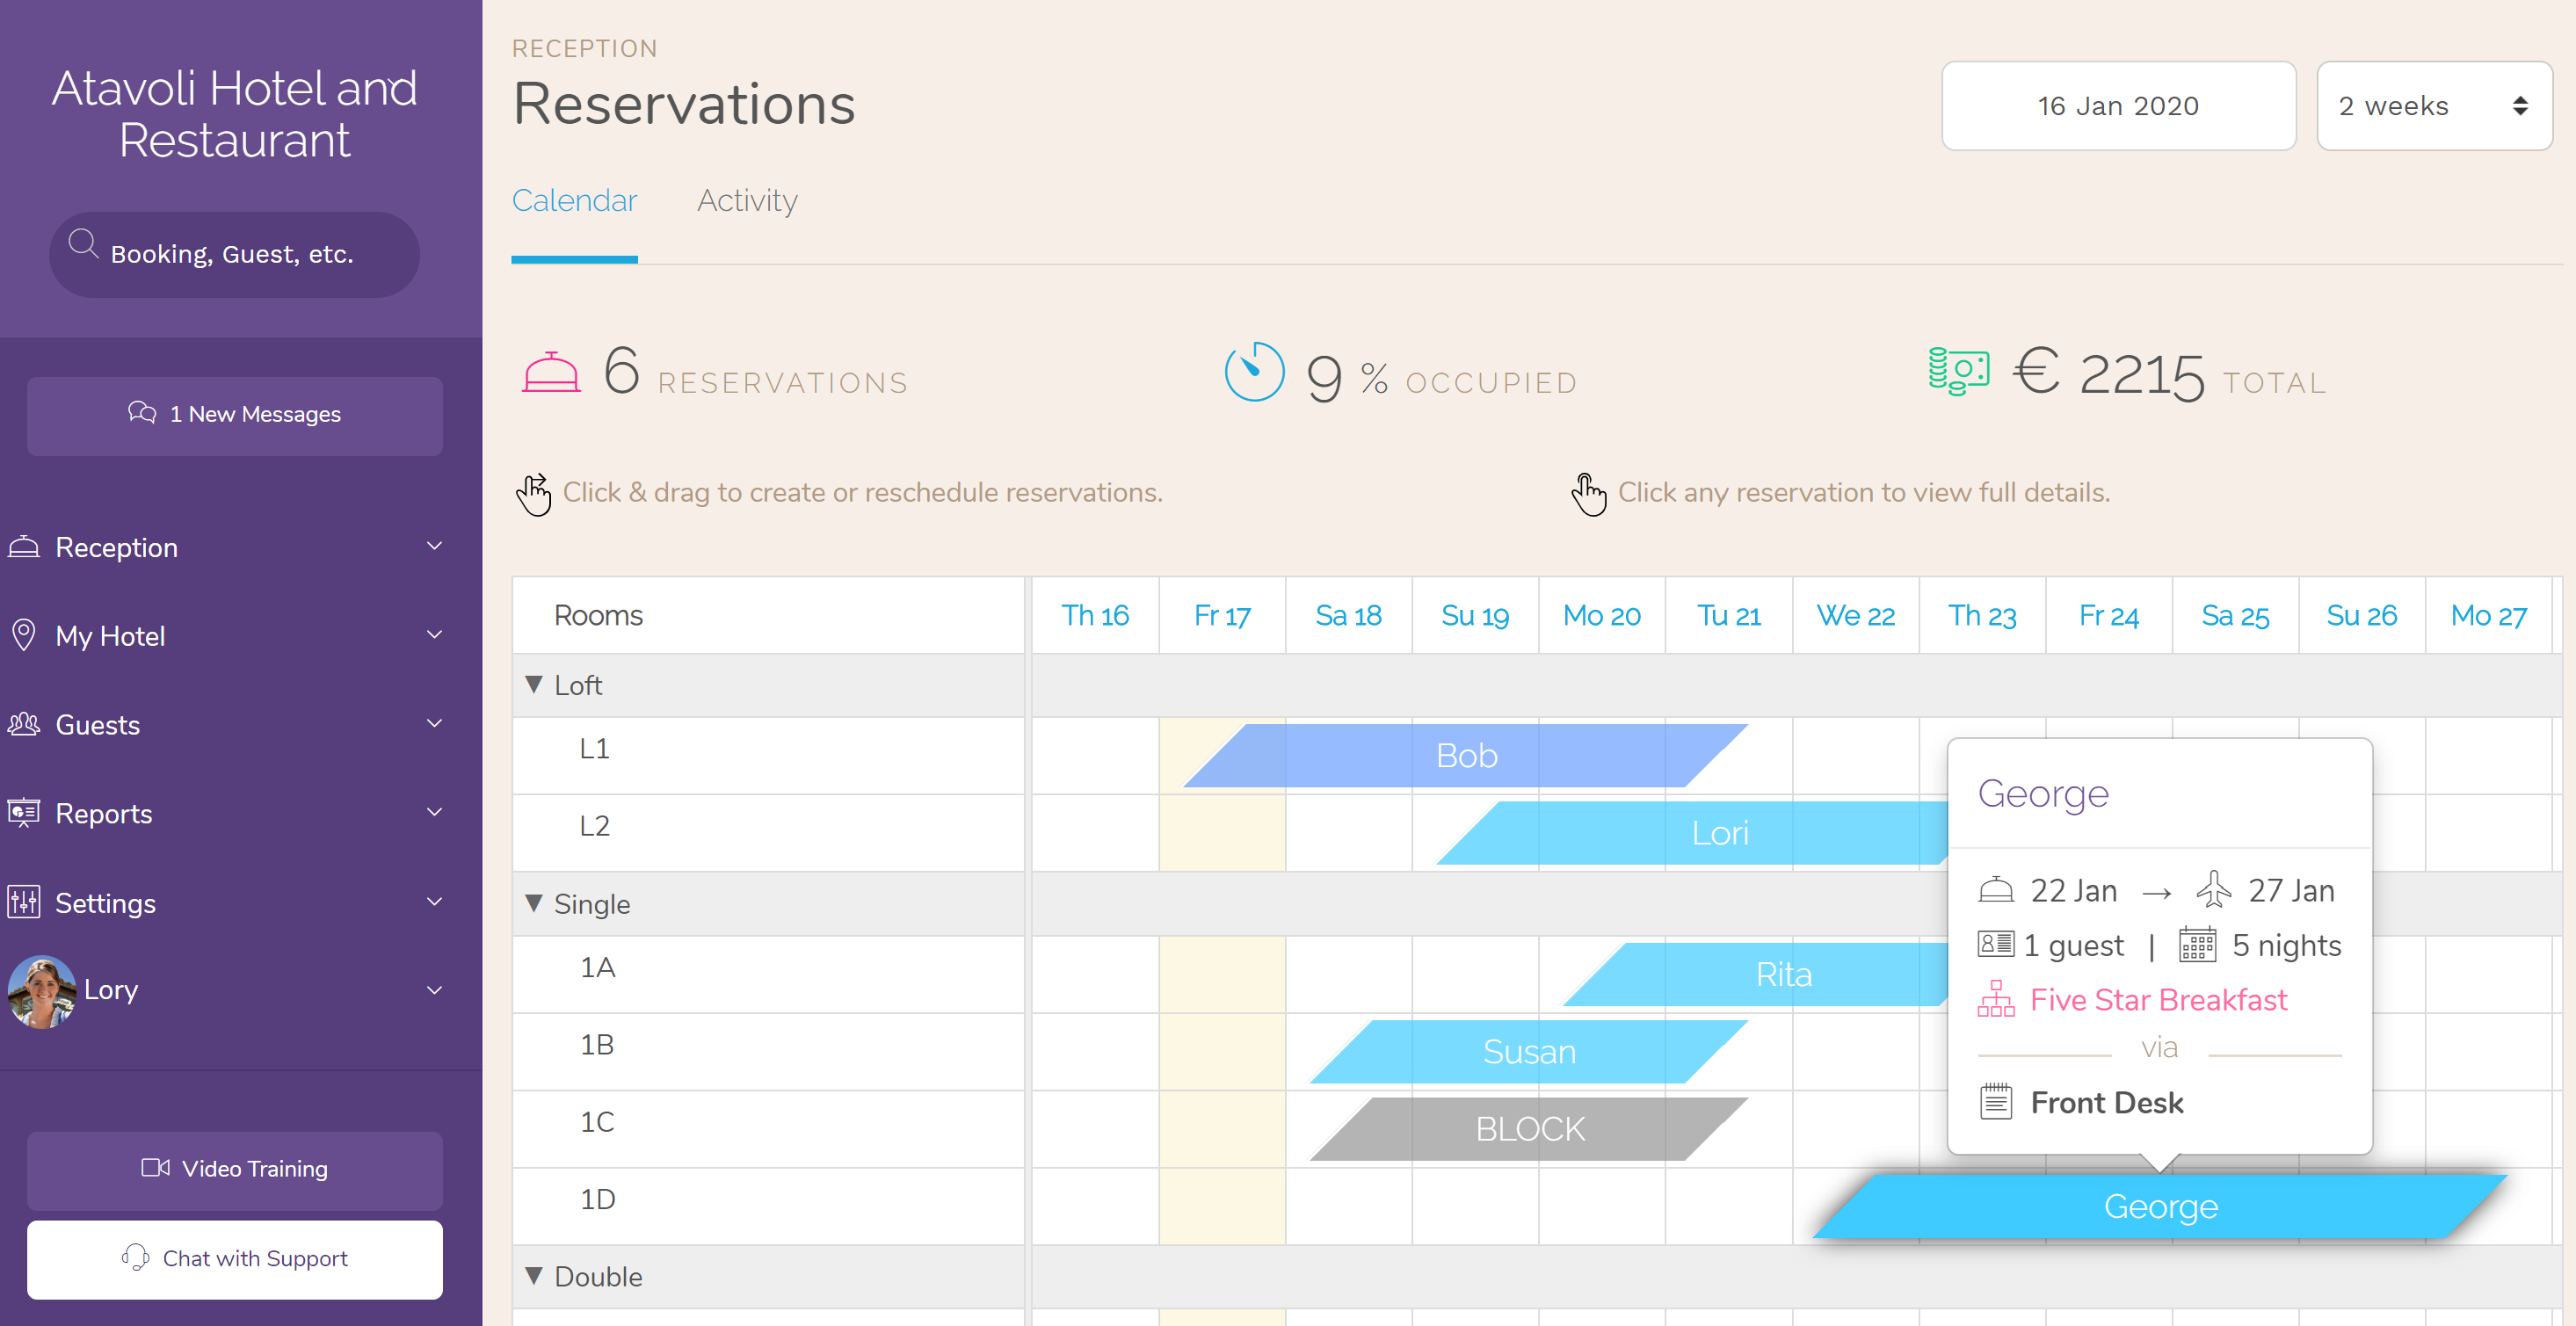 Hotel Drag & Drop Front Desk Reservation Calendar Your reservations calendar has been updated to make it even easier to manage your hotel’s daily activity. You can now drag and resize to create and reschedule bookings.